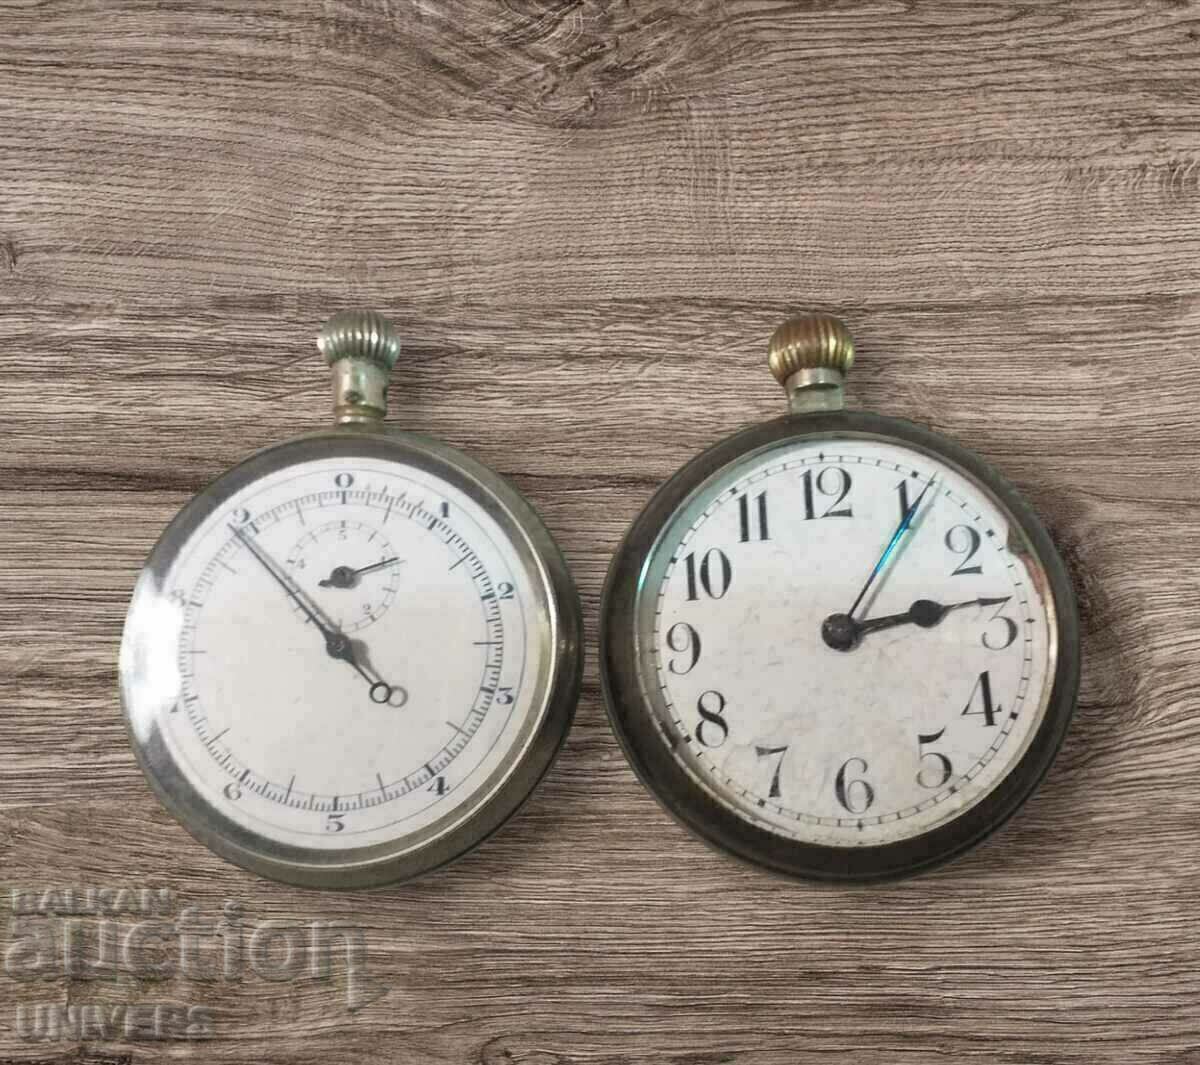 Pocket watch and stopwatch